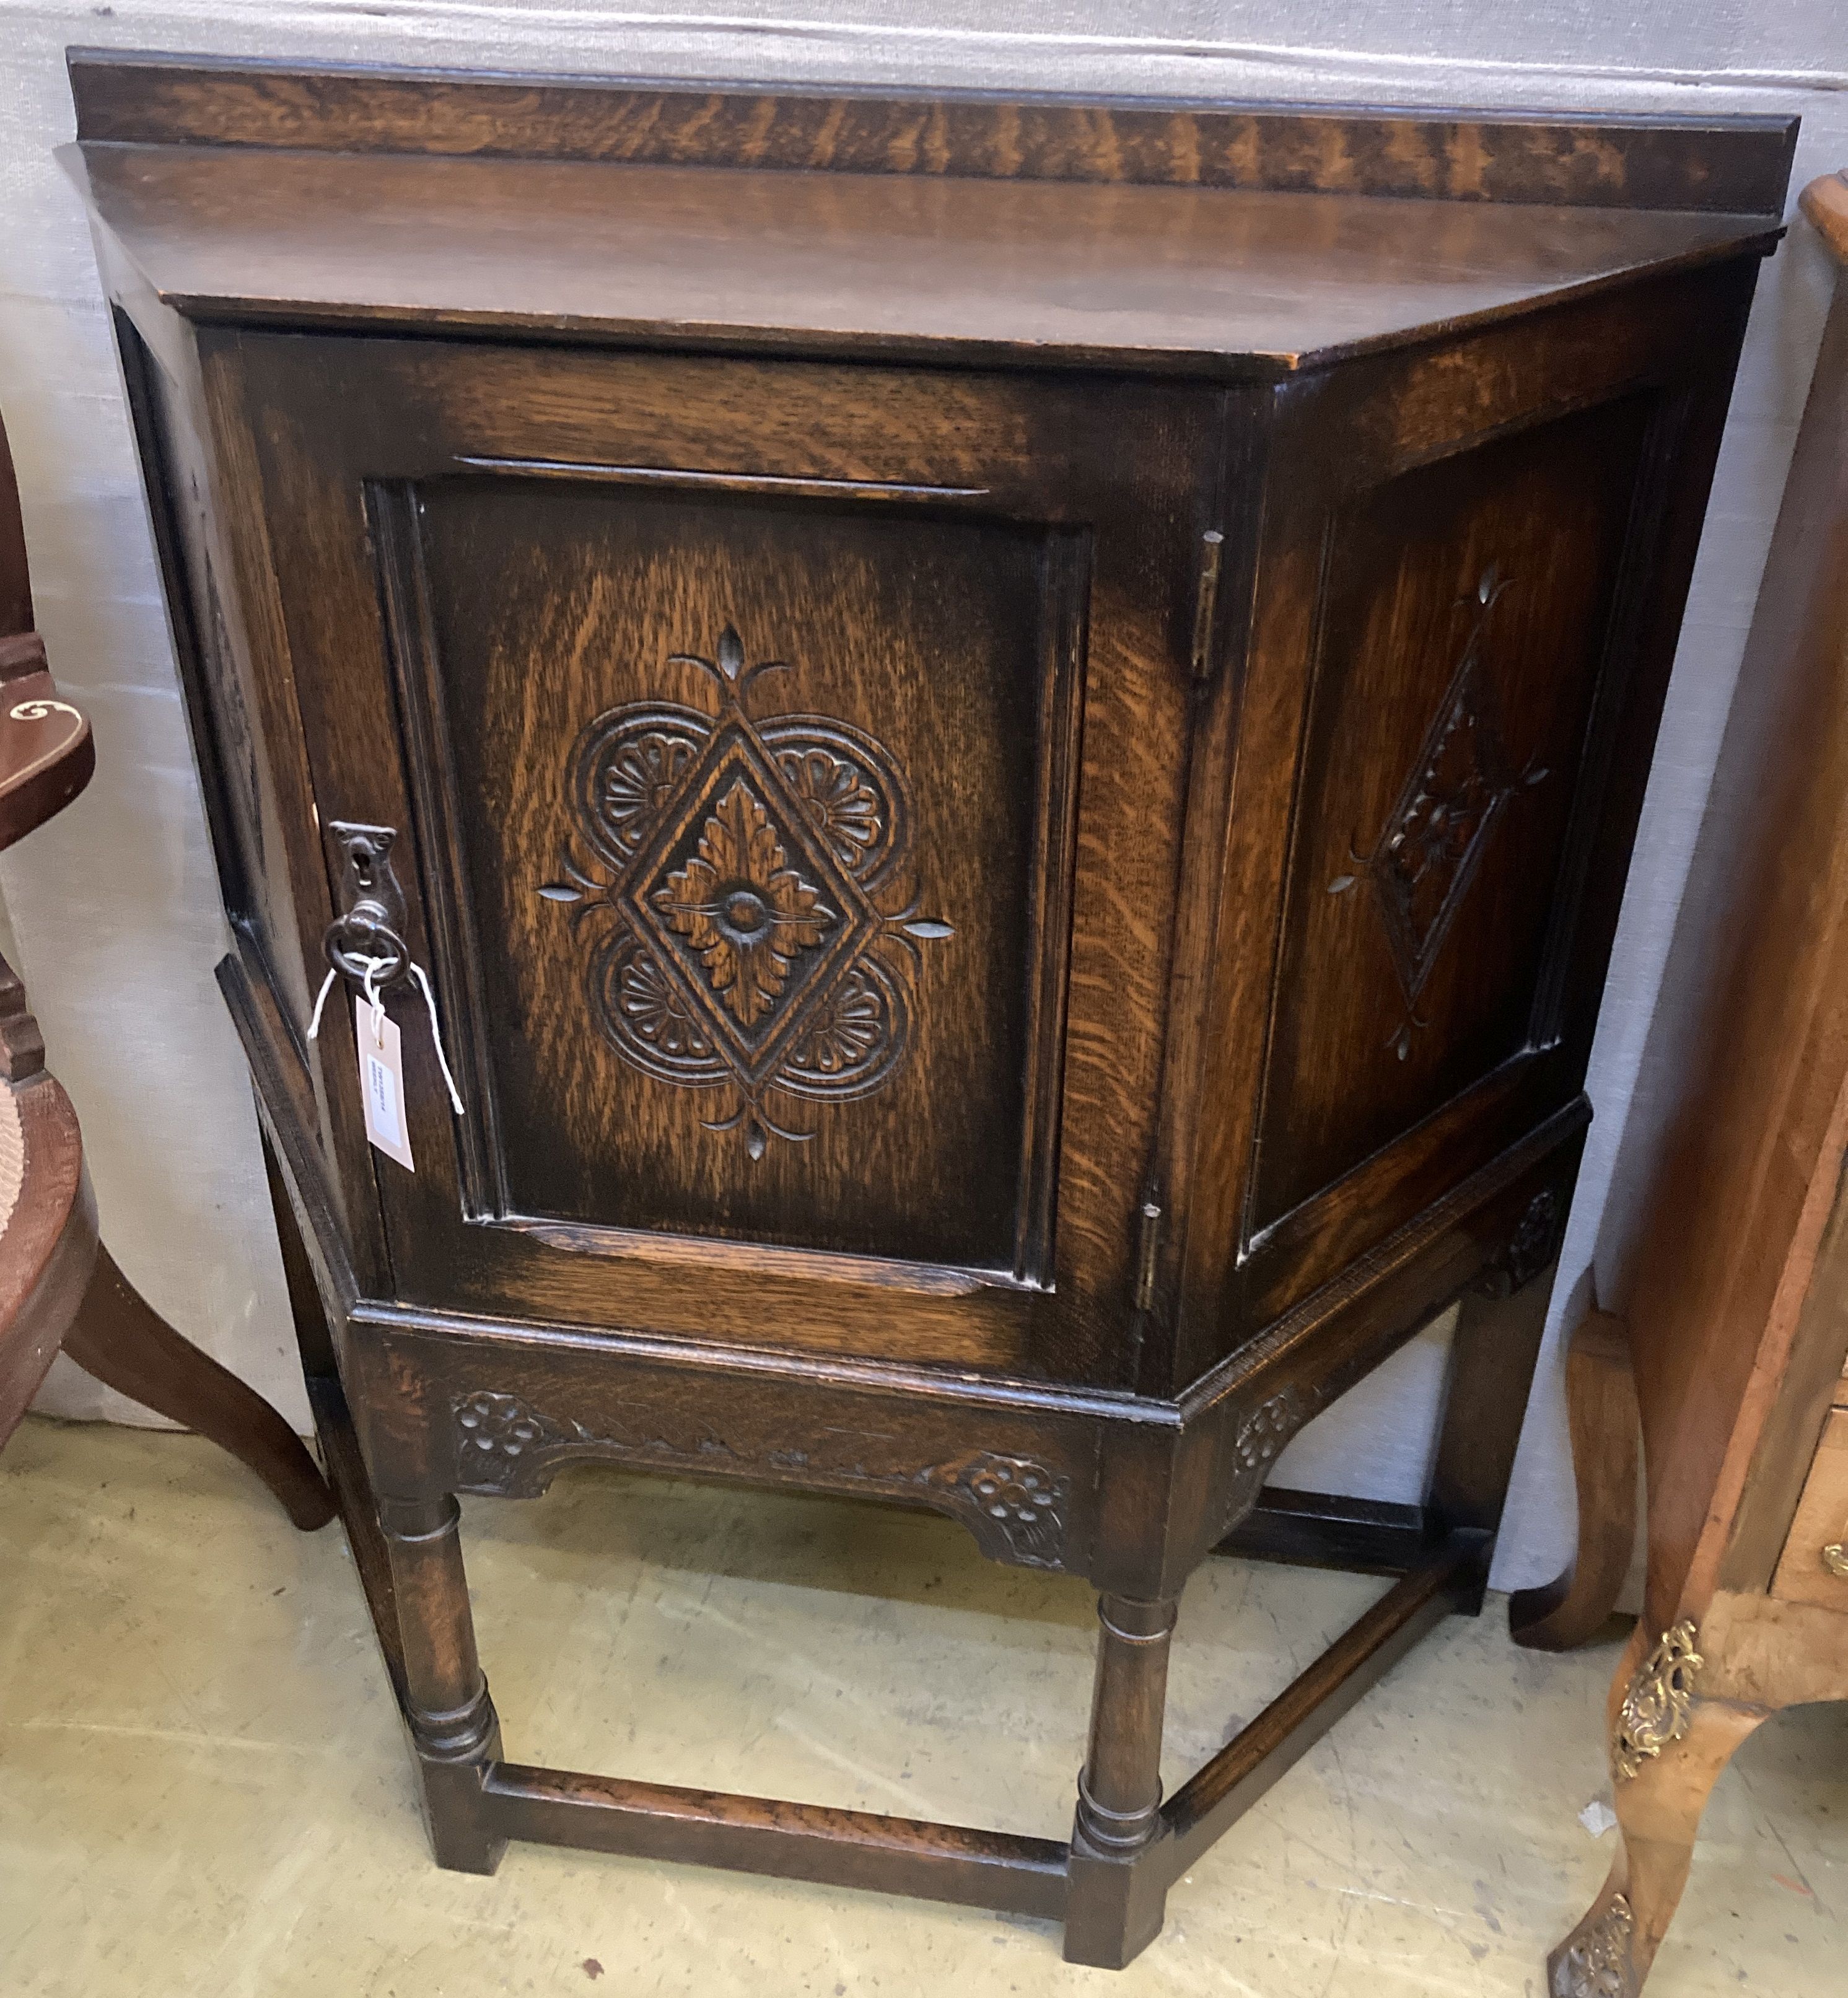 An 18th century style carved oak side cabinet, width 90cm, depth 32cm, height 88cm